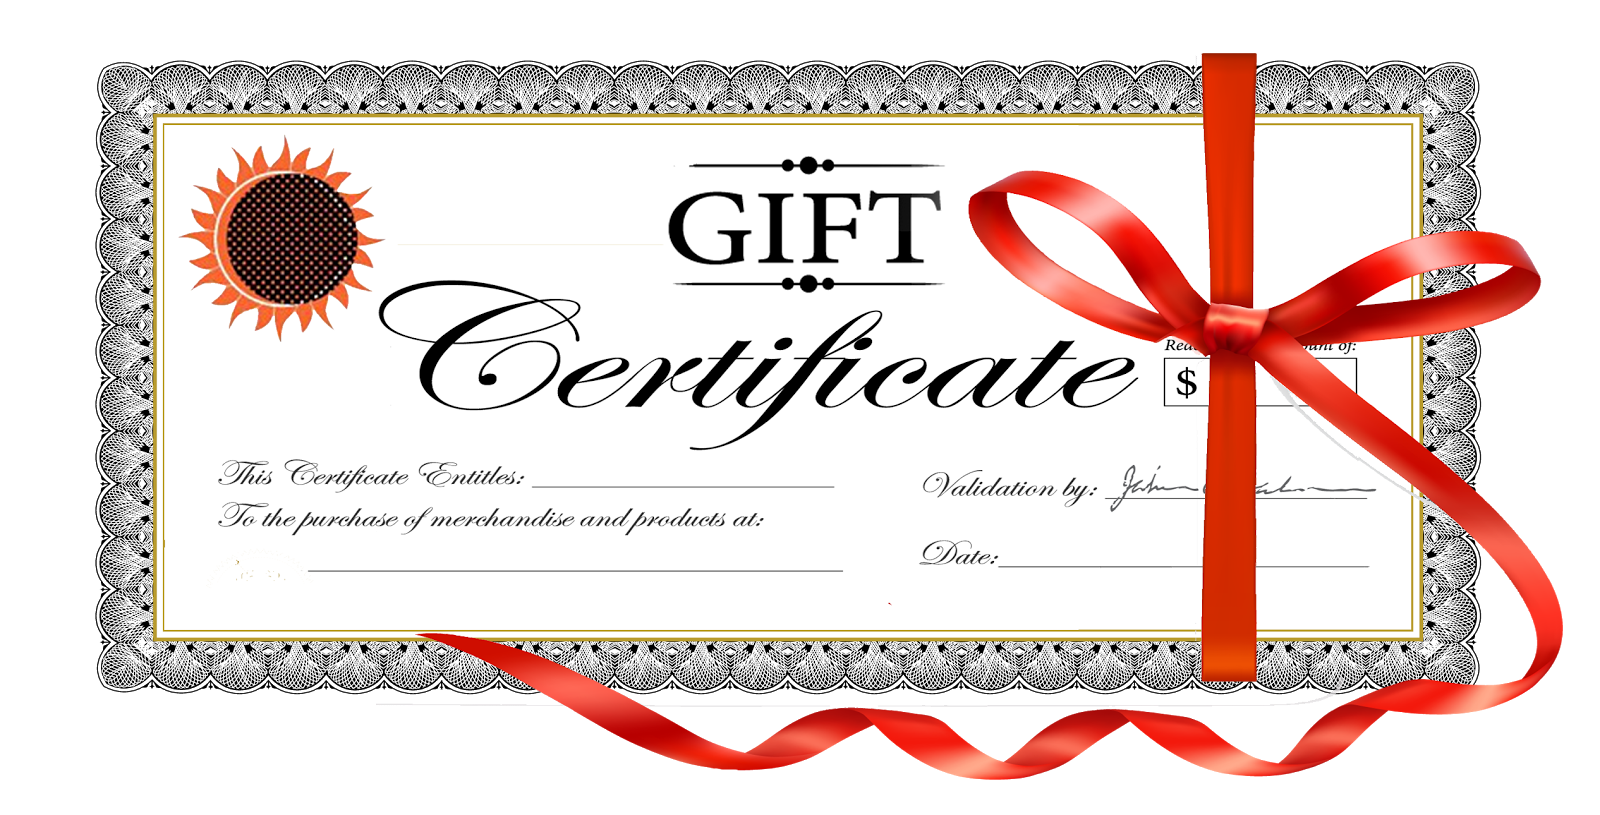 Gift Certificate Knights of Columbus Supplies